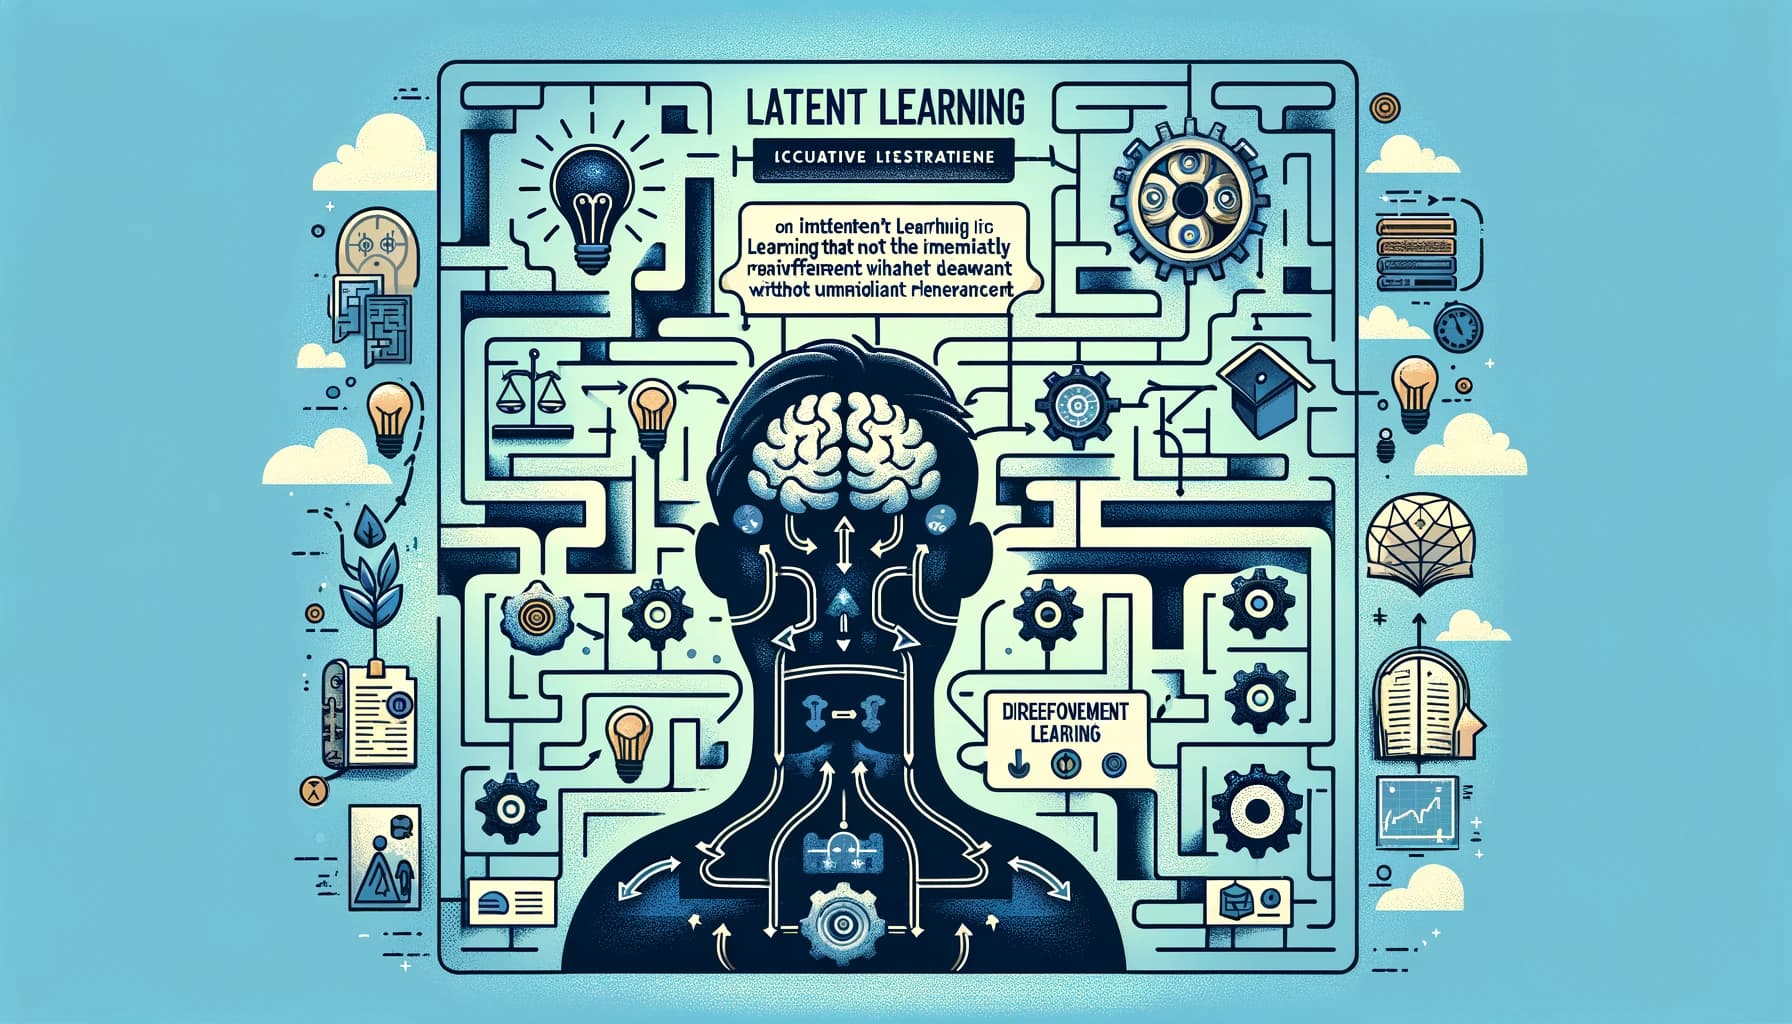 Latent Learning: The Unseen Bridge Between Cognition and Behavior